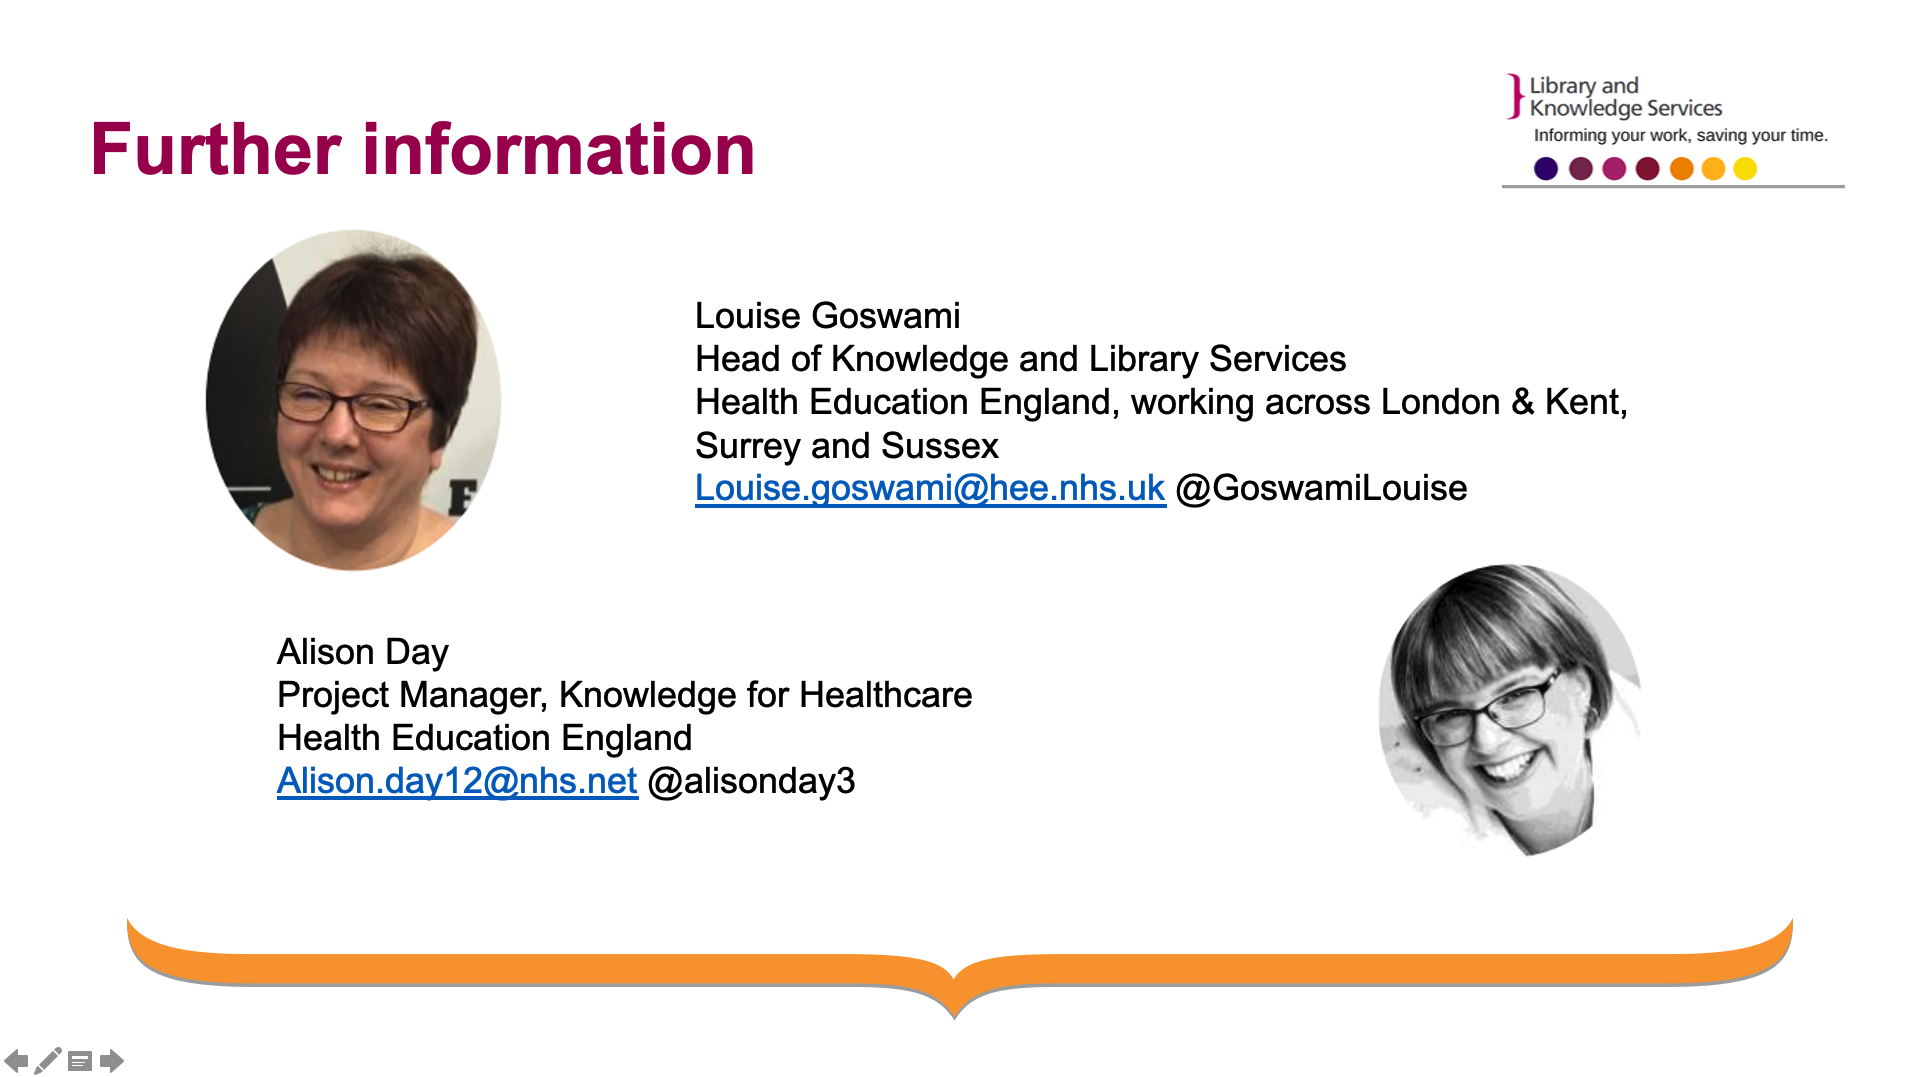 This contains the contact information for Louise Goswami and Louise Day. Louise Goswami- Head of Knowledge and Library Services Health Education England, working across London & Kent, Surrey and Sussex Louise.goswami@hee.nhs.uk @GoswamiLouise. Alison Day - Project Manager, Knowledge for Healthcare Health Education England Alison.day12@nhs.net @alisonday3